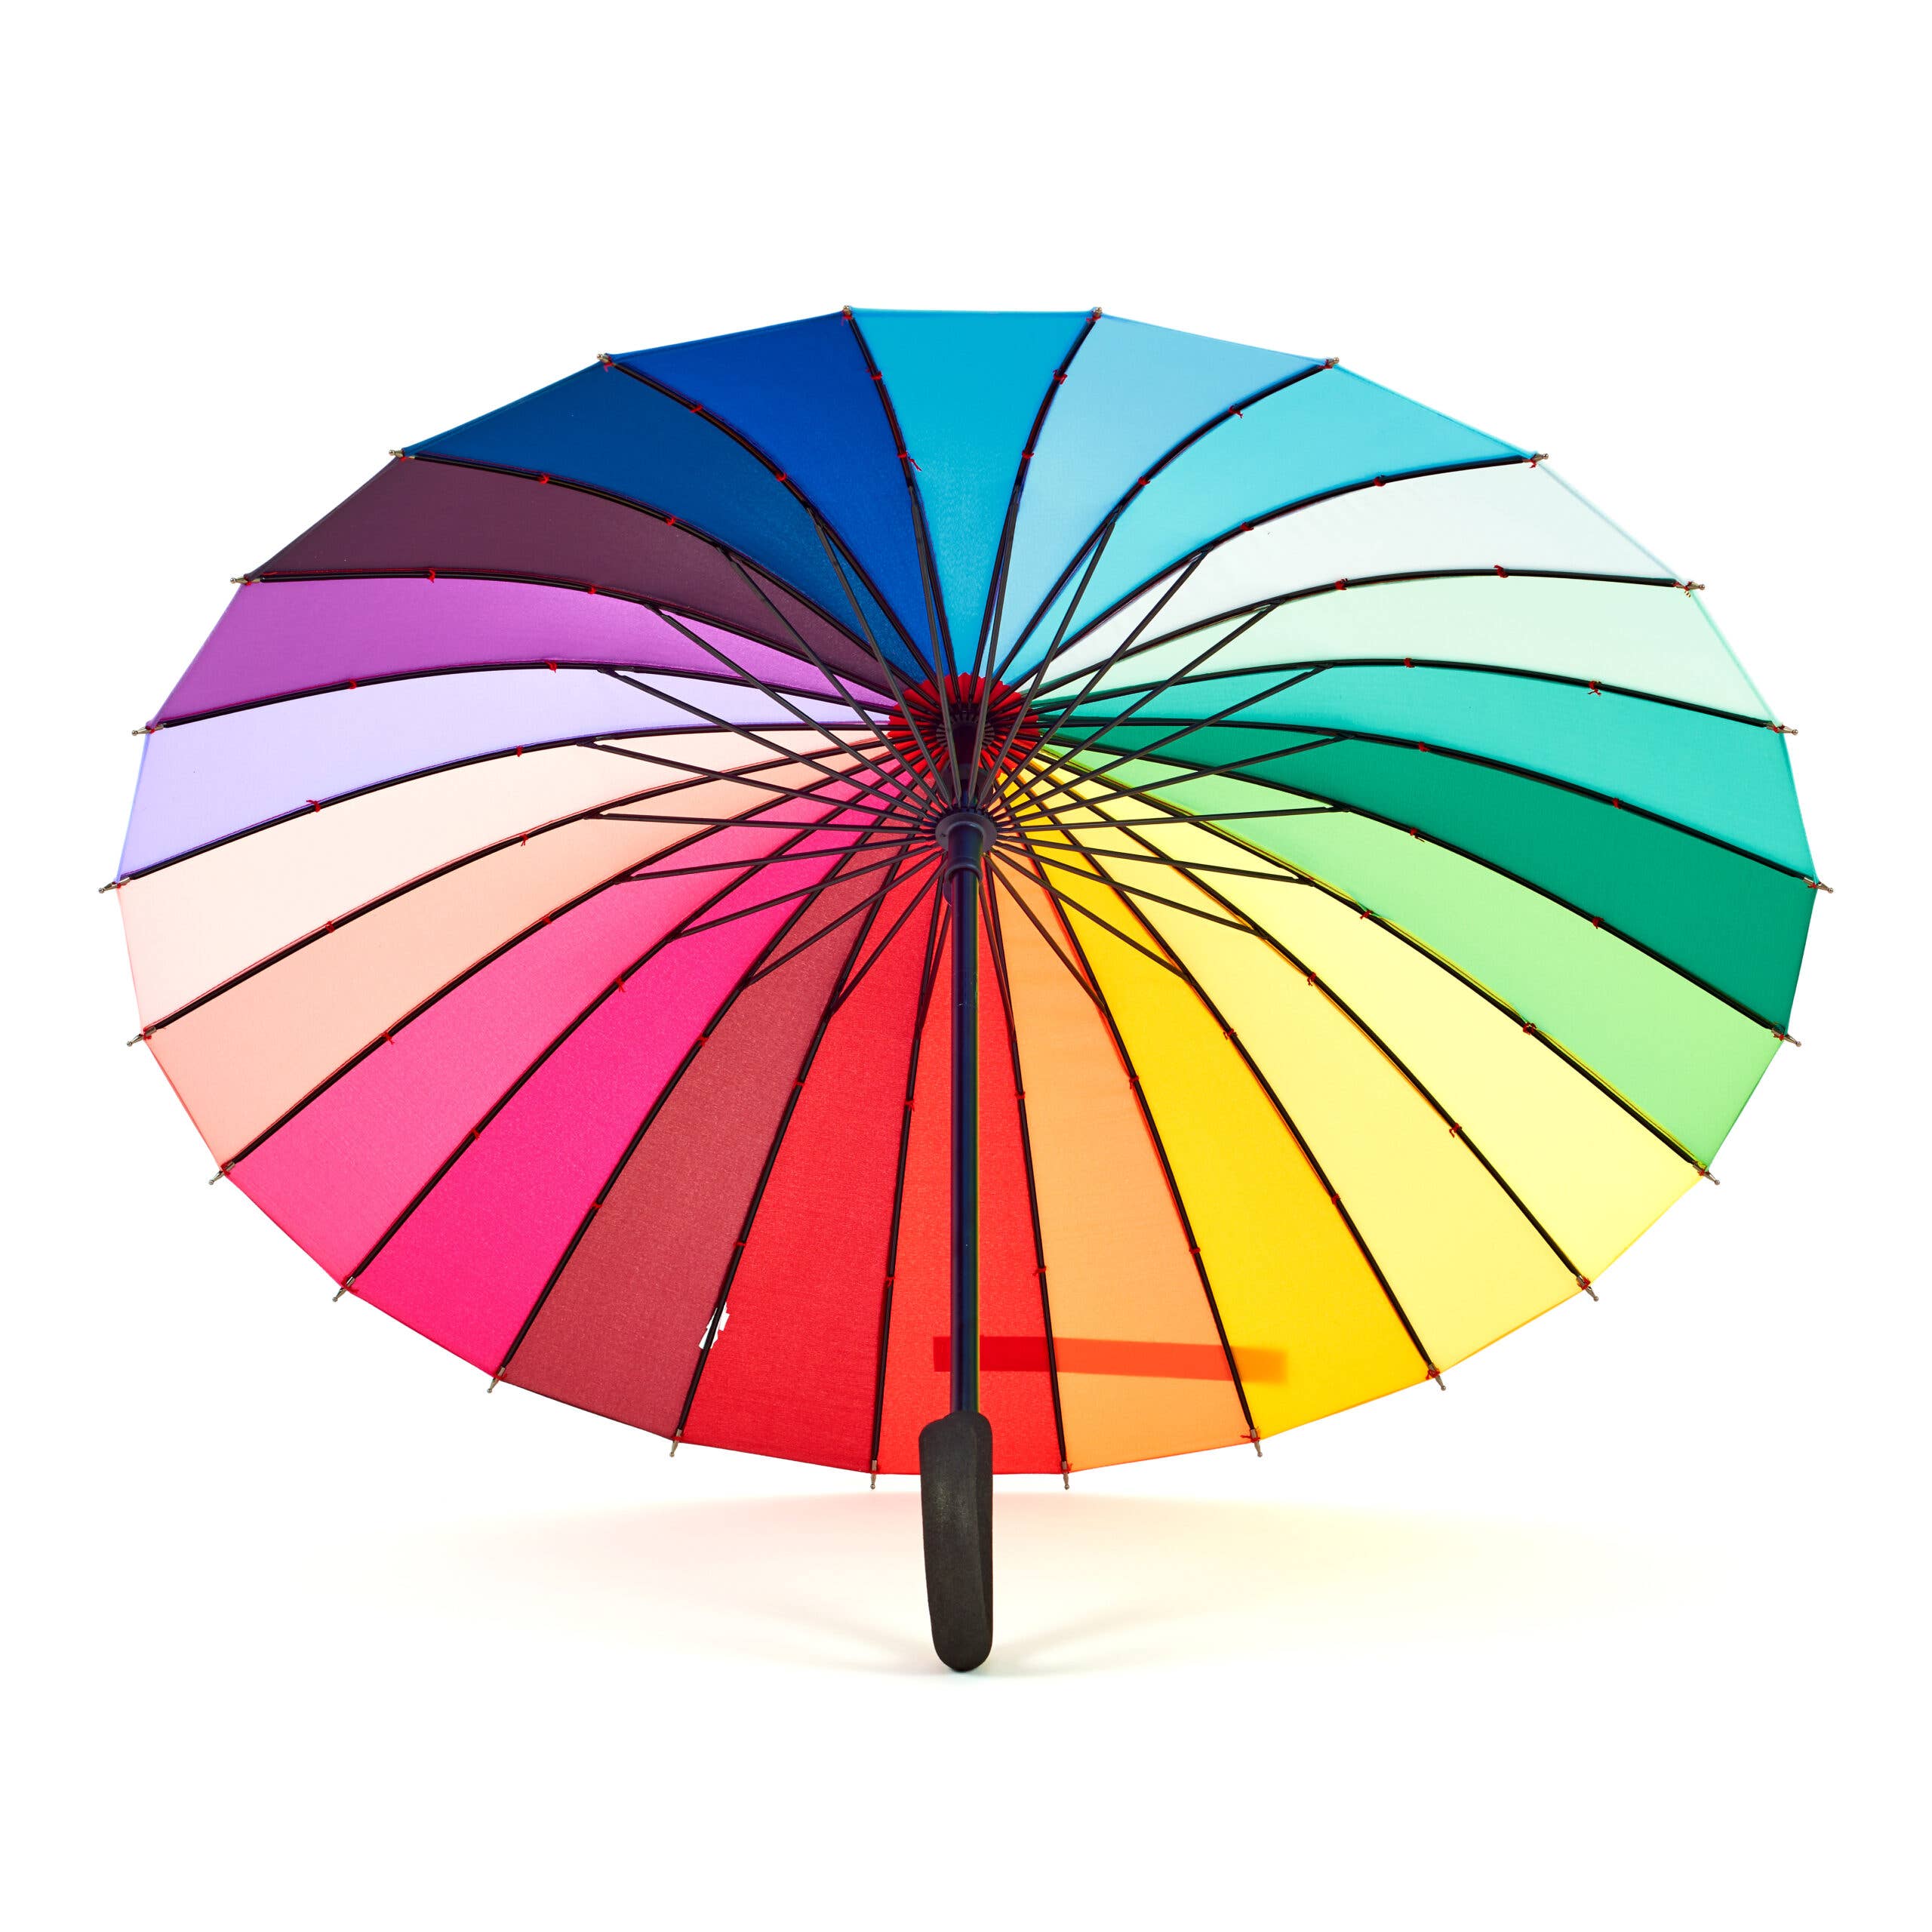 Everyday Multicolour Umbrella from the Soake Collection